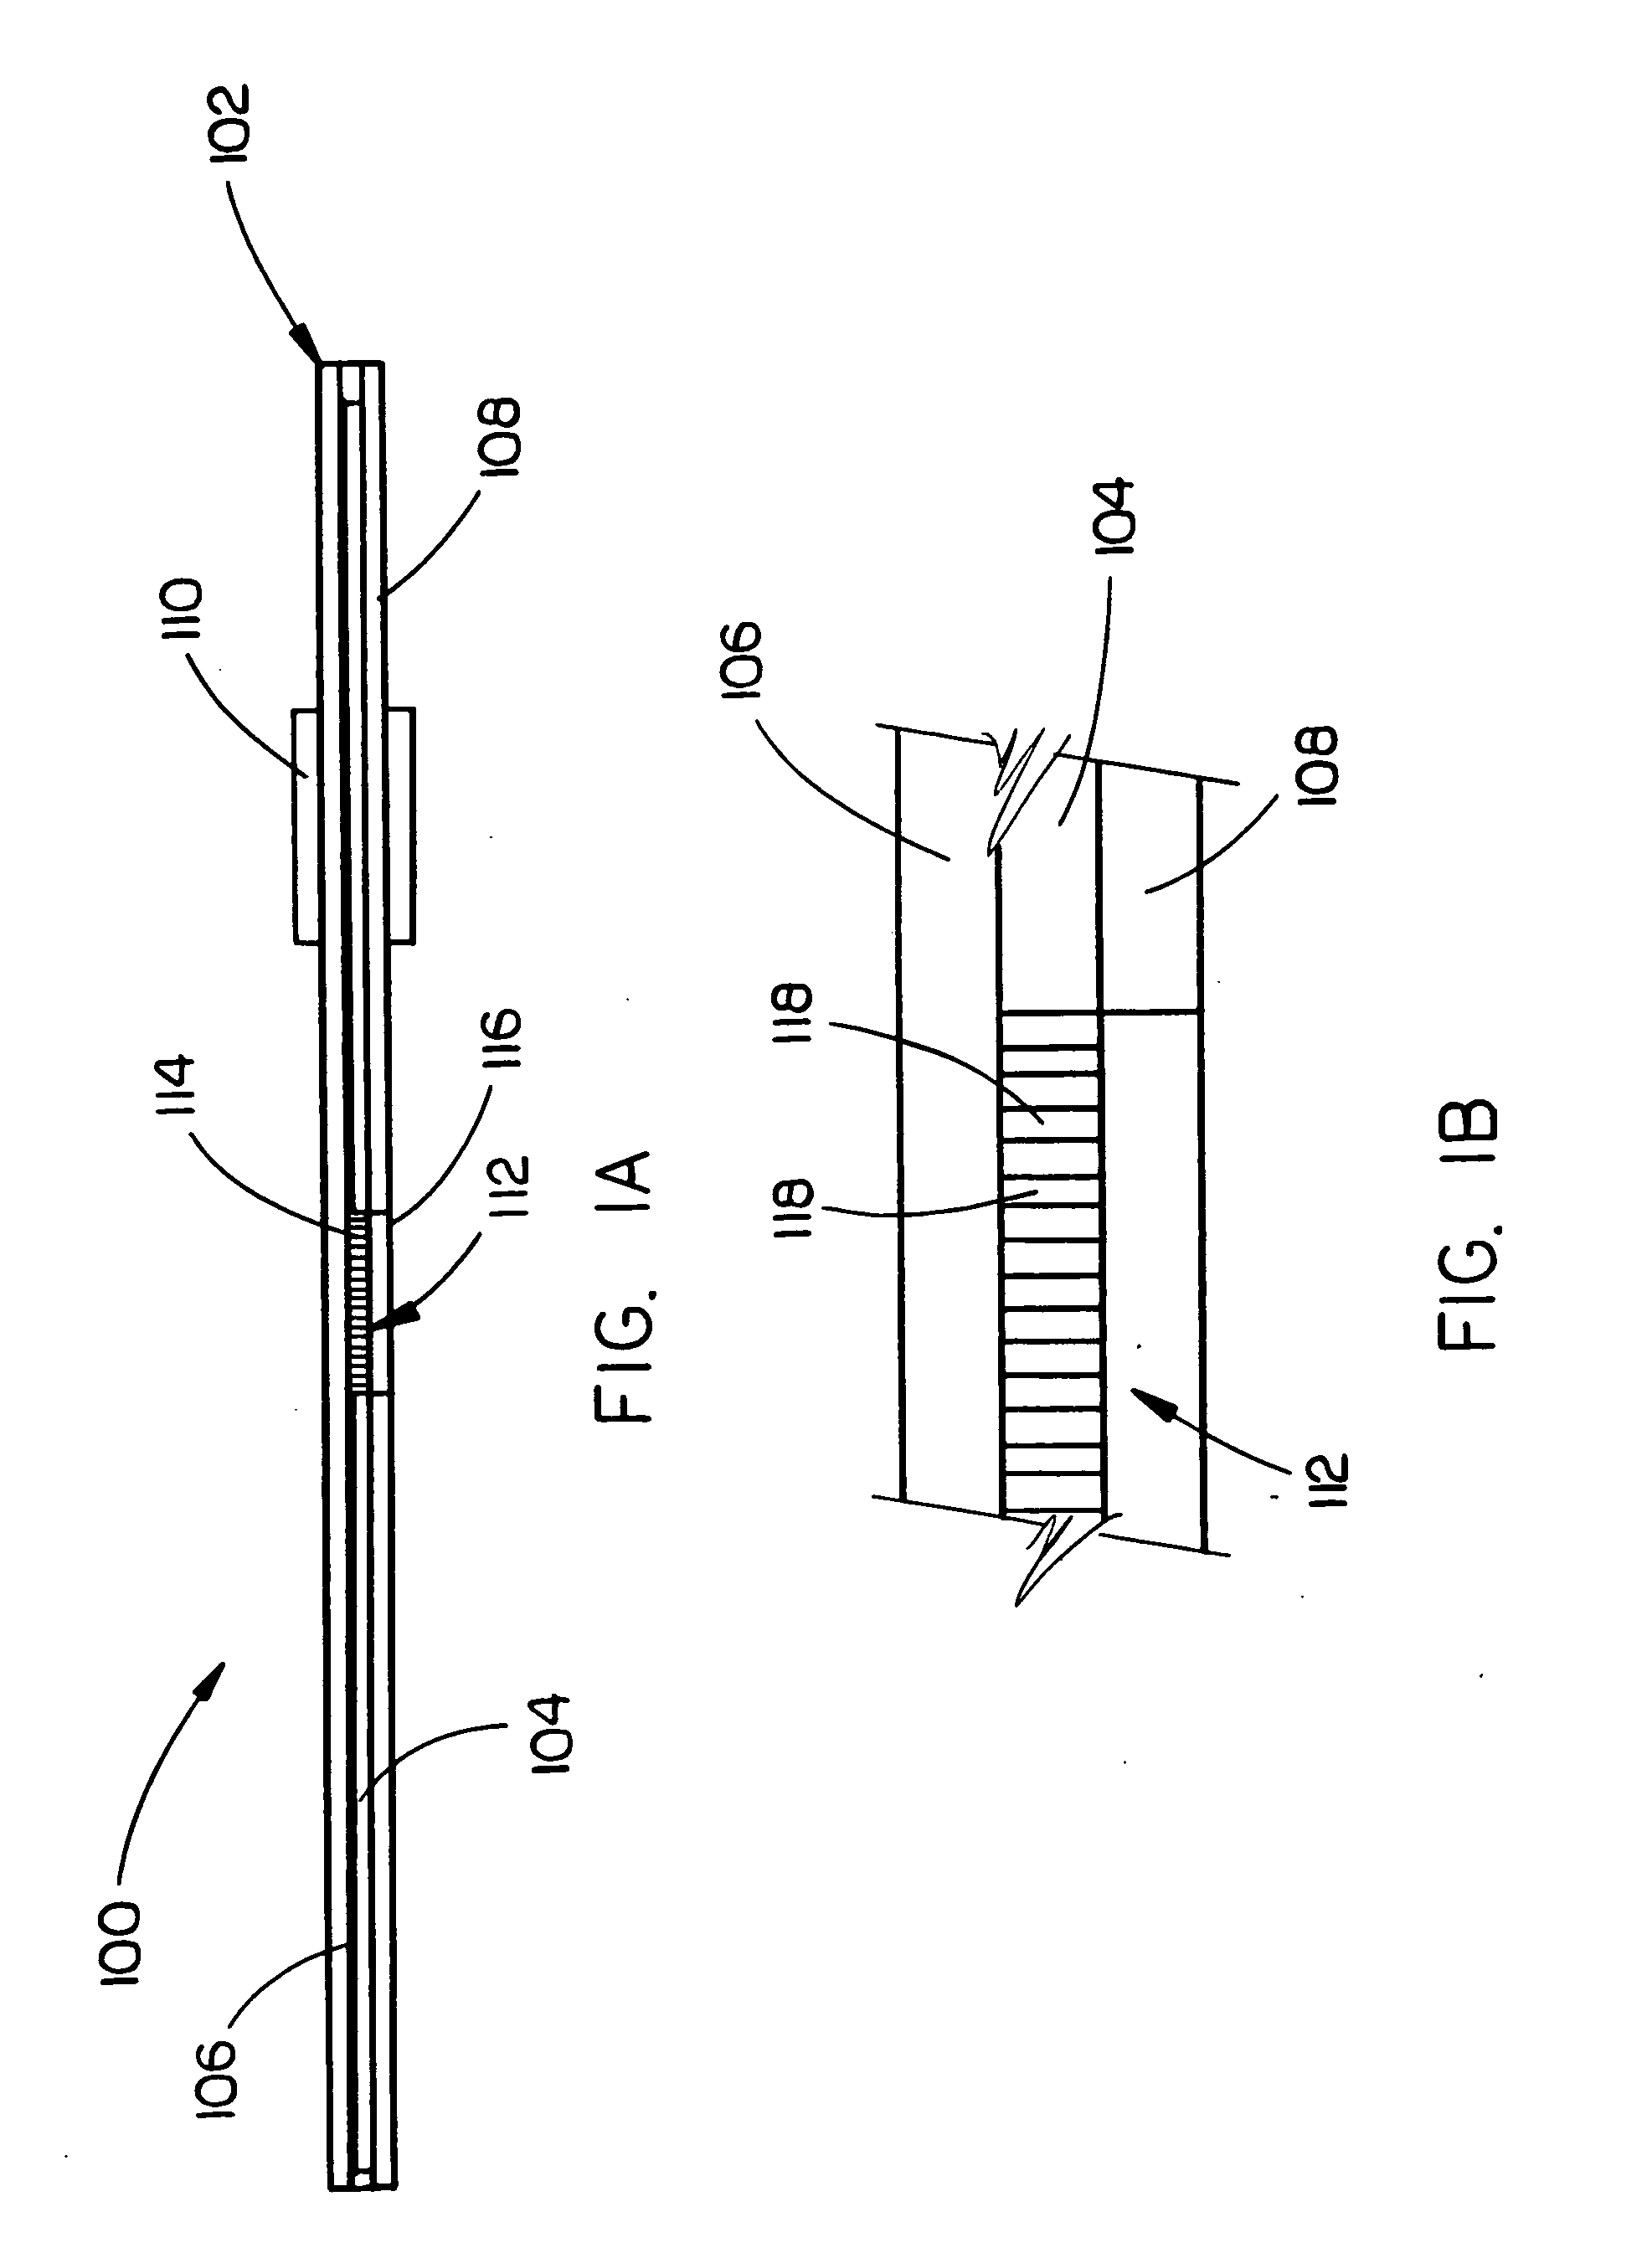 Mechanically compliant thermal spreader with an embedded cooling loop for containing and circulating electrically-conductive liquid